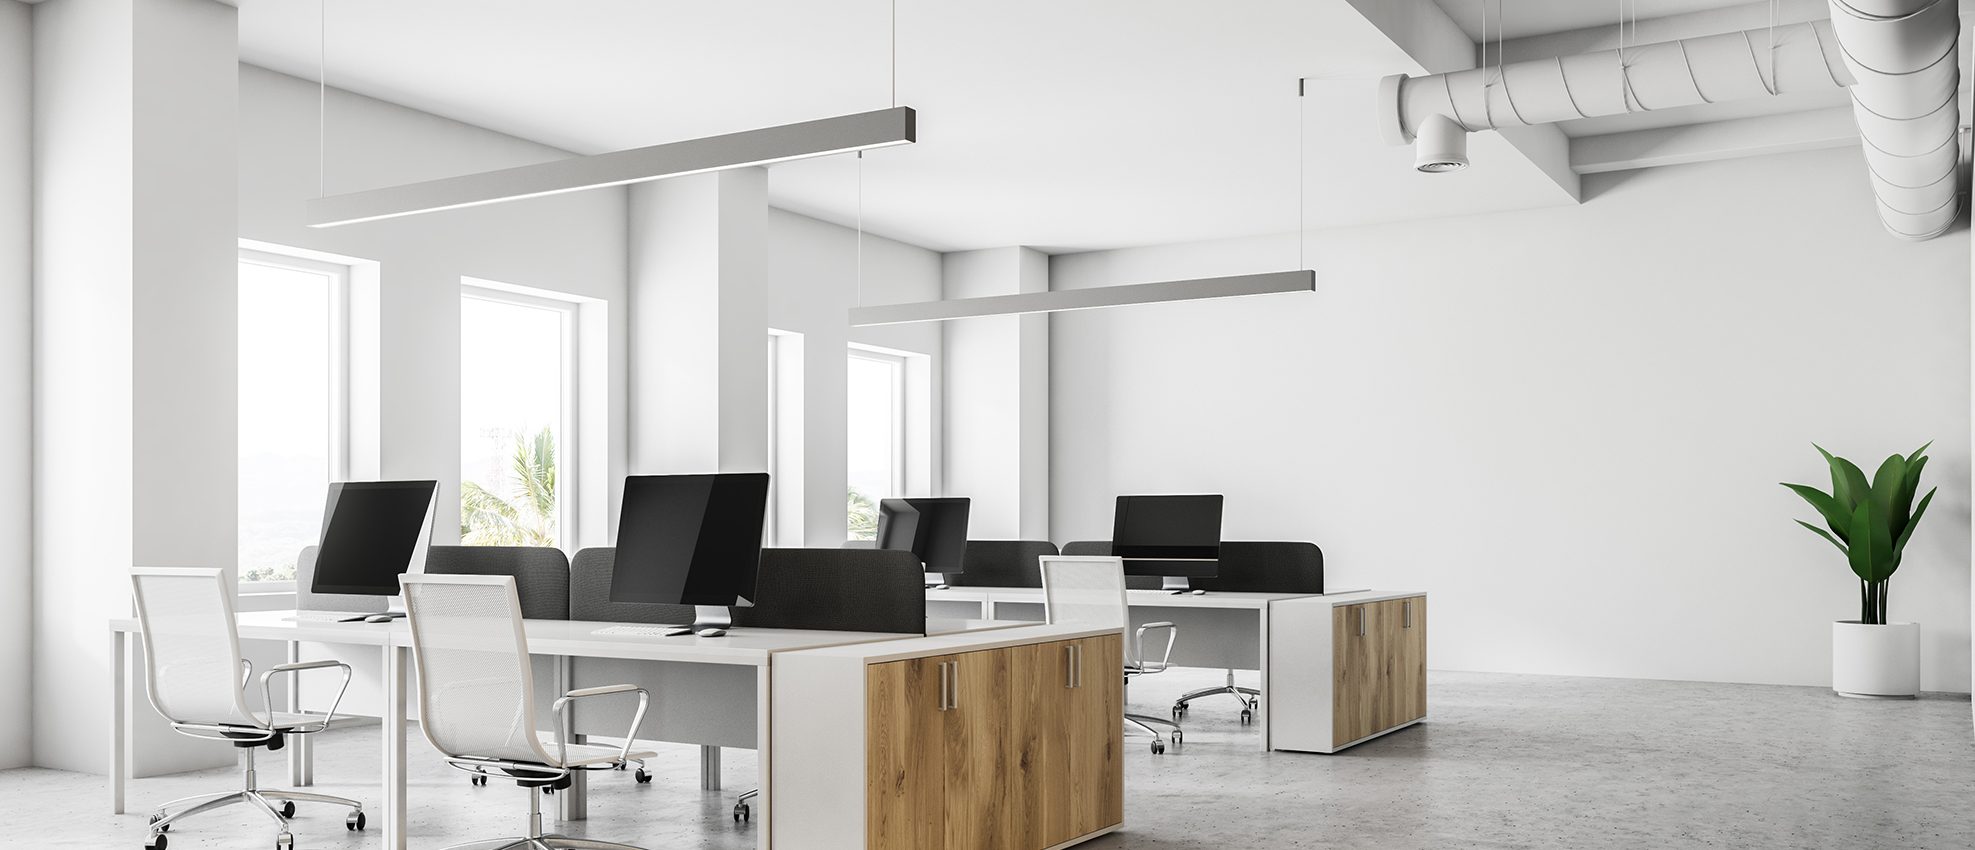 Office Suspended Lighting